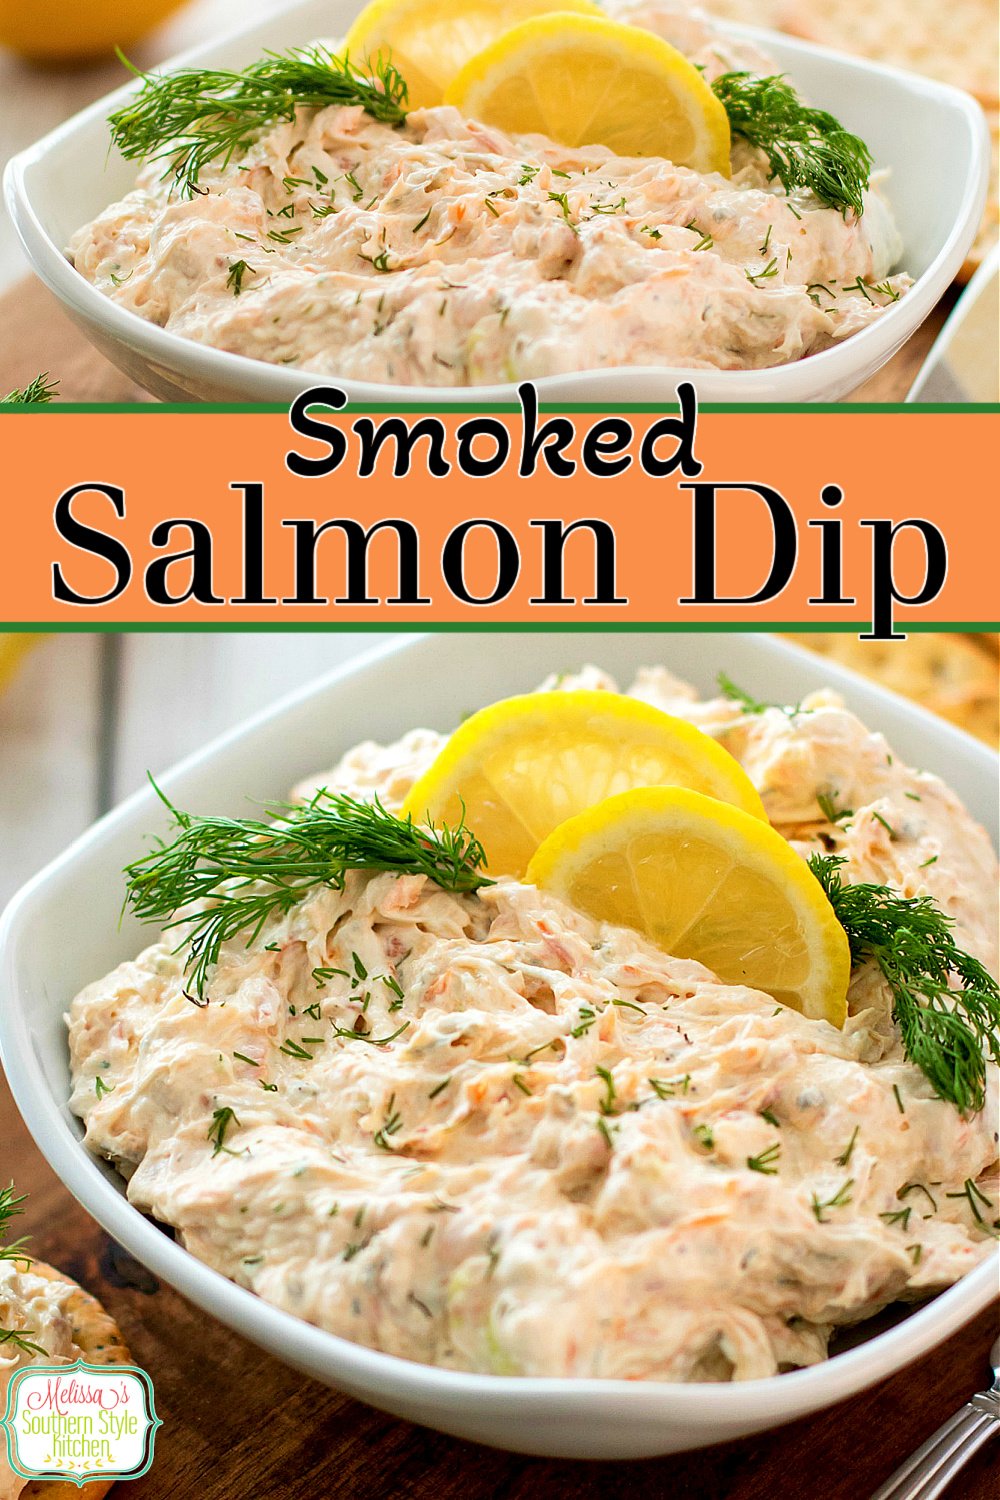 Enjoy this smoky salmon dip with chips, crostina or pita chips for dipping #salmondip #salmon #diprecipes #appetizers #bestsalmondip #smokedsalmon #snacks #southernfood #seafoodrecipes #southernrecipes via @melissasssk